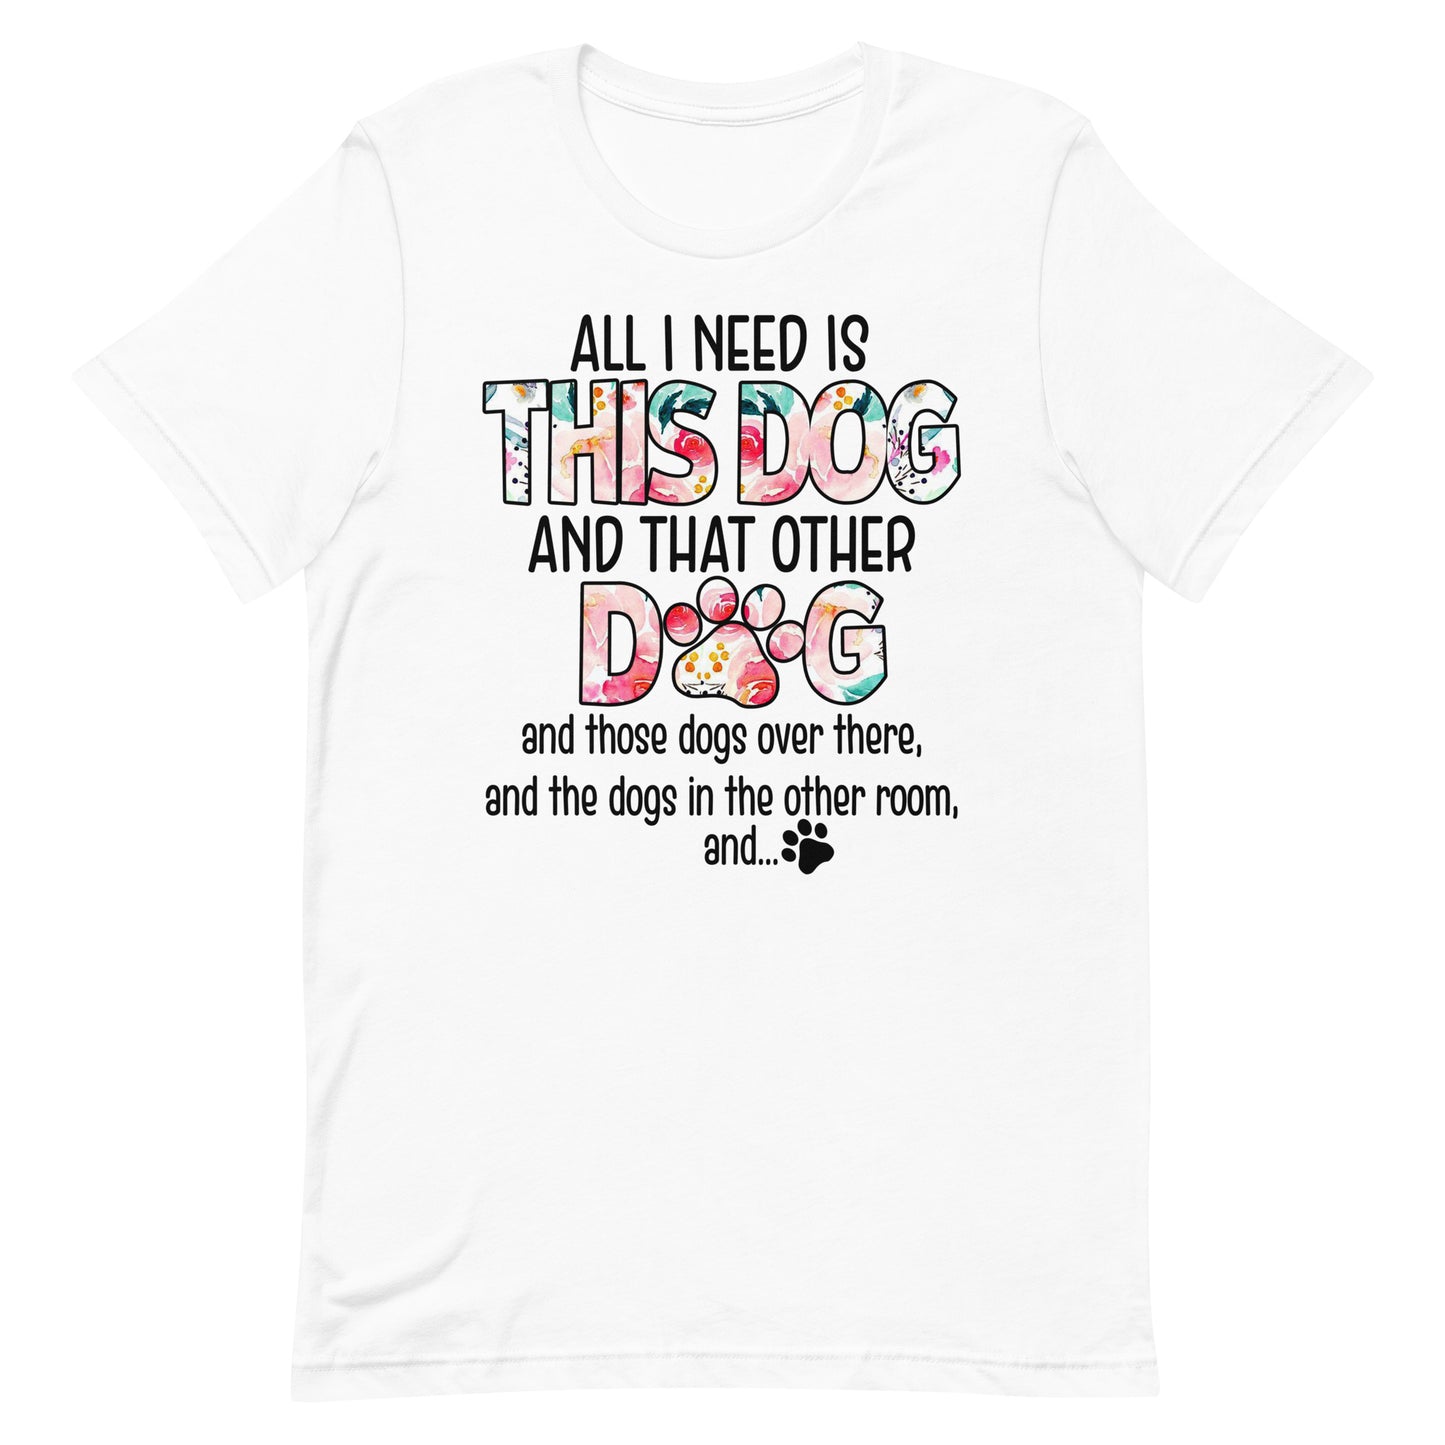 All I Need is This Dog and That Other Dog T-Shirt